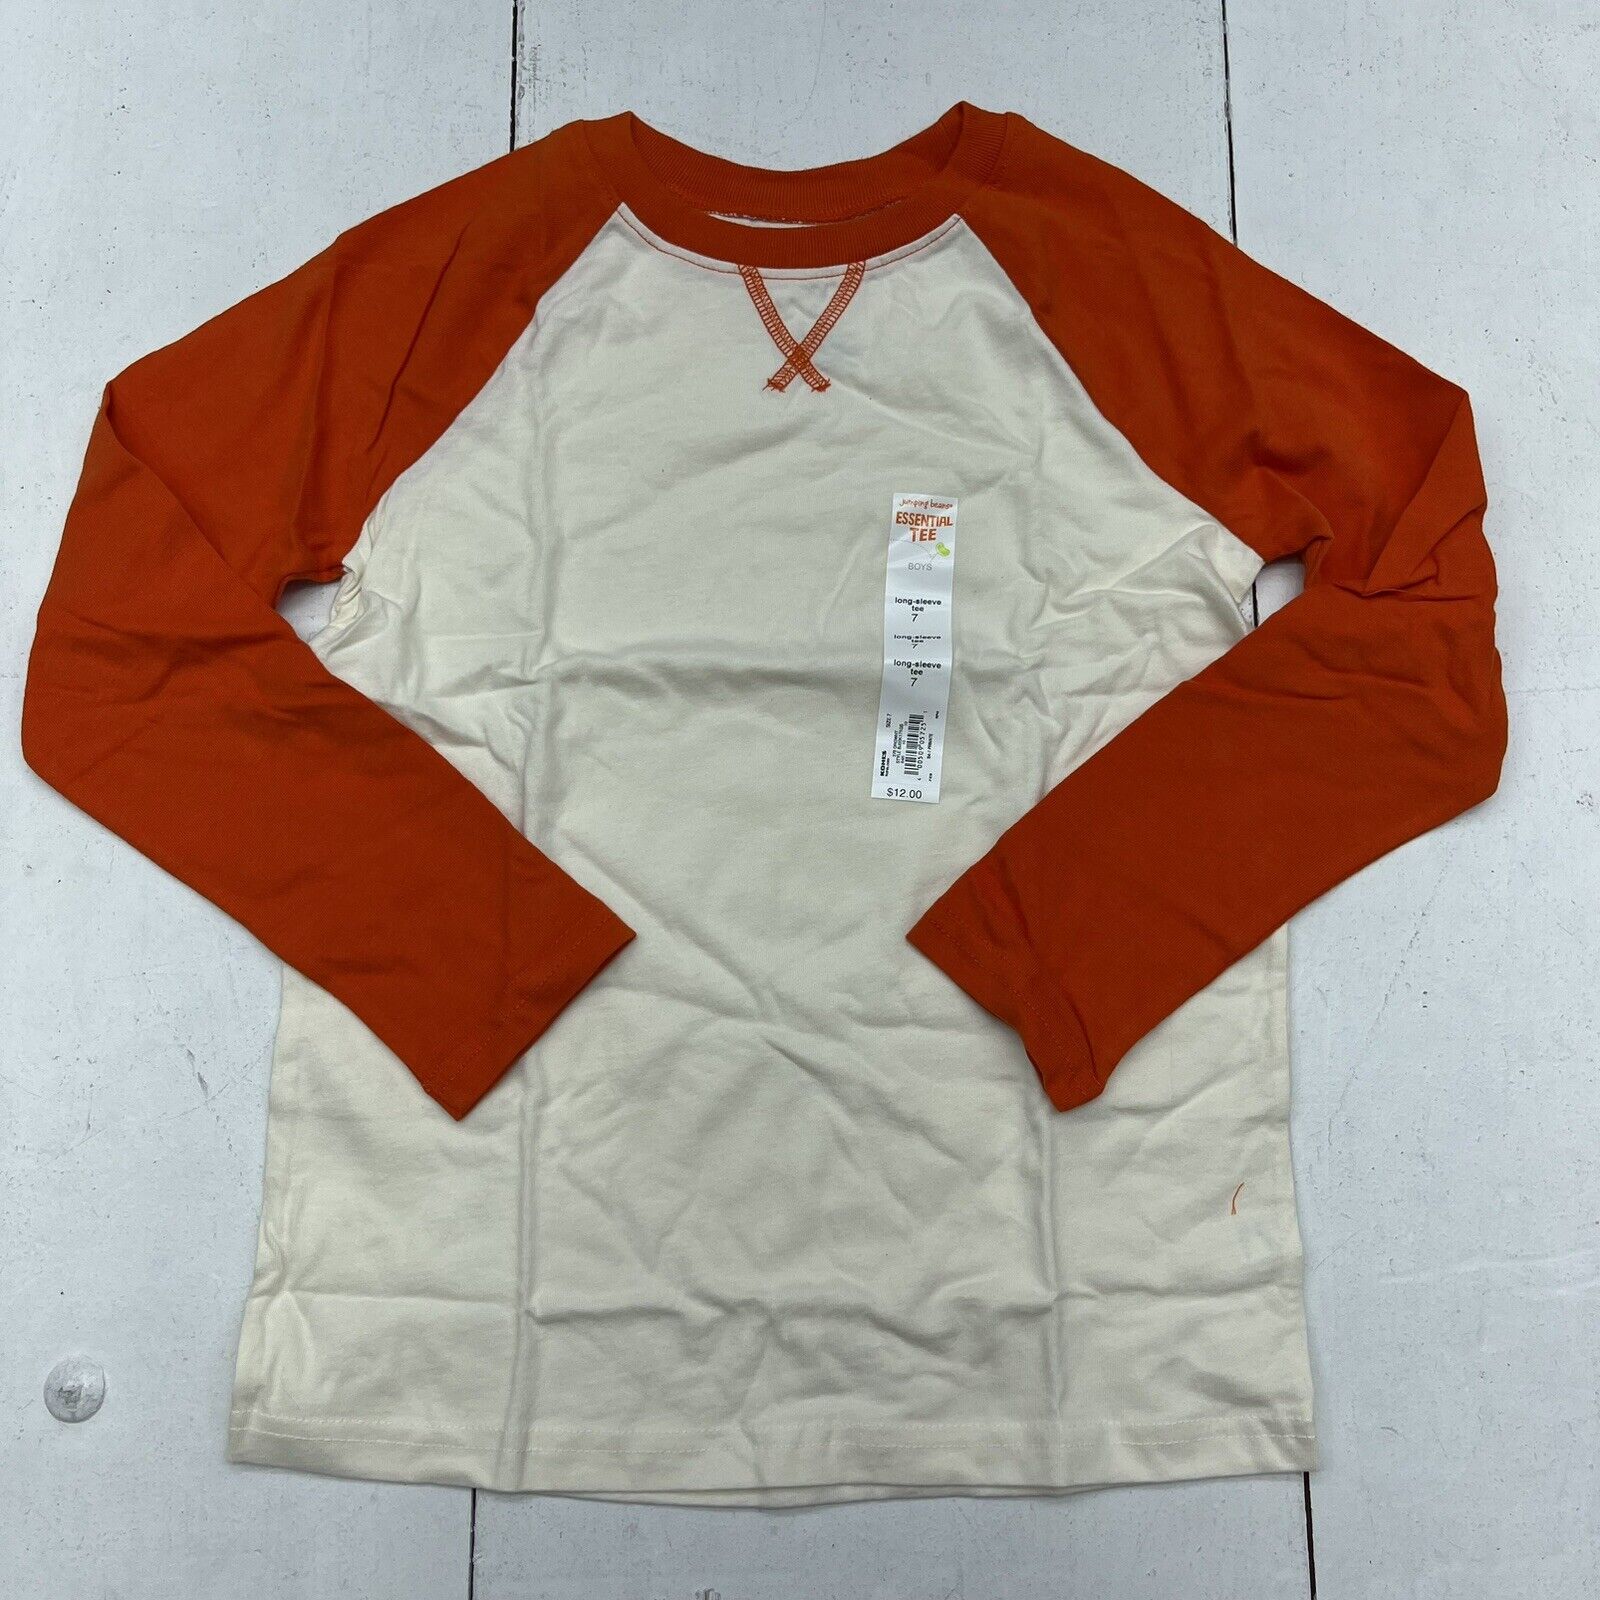 Jumping Beans White & Orange Essential Long Sleeve T-Shirt Boys Size 7 NEW